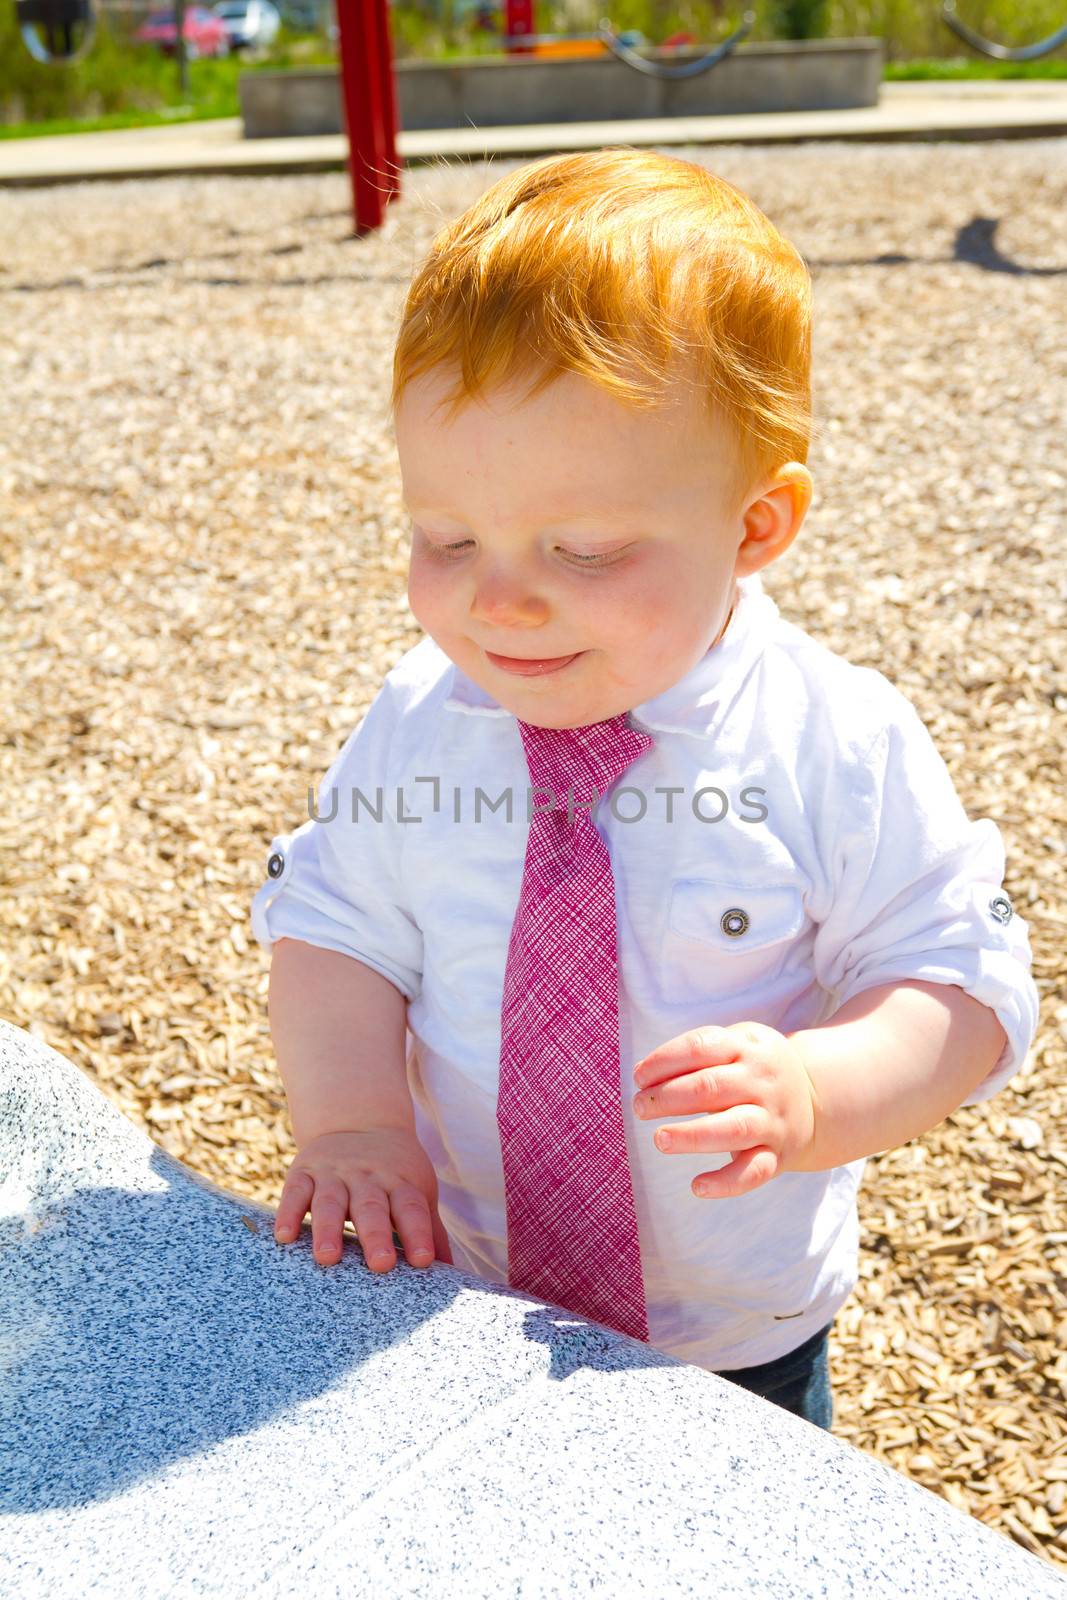 A caucasian baby boy plays at the park wearing a white shirt and a tie.